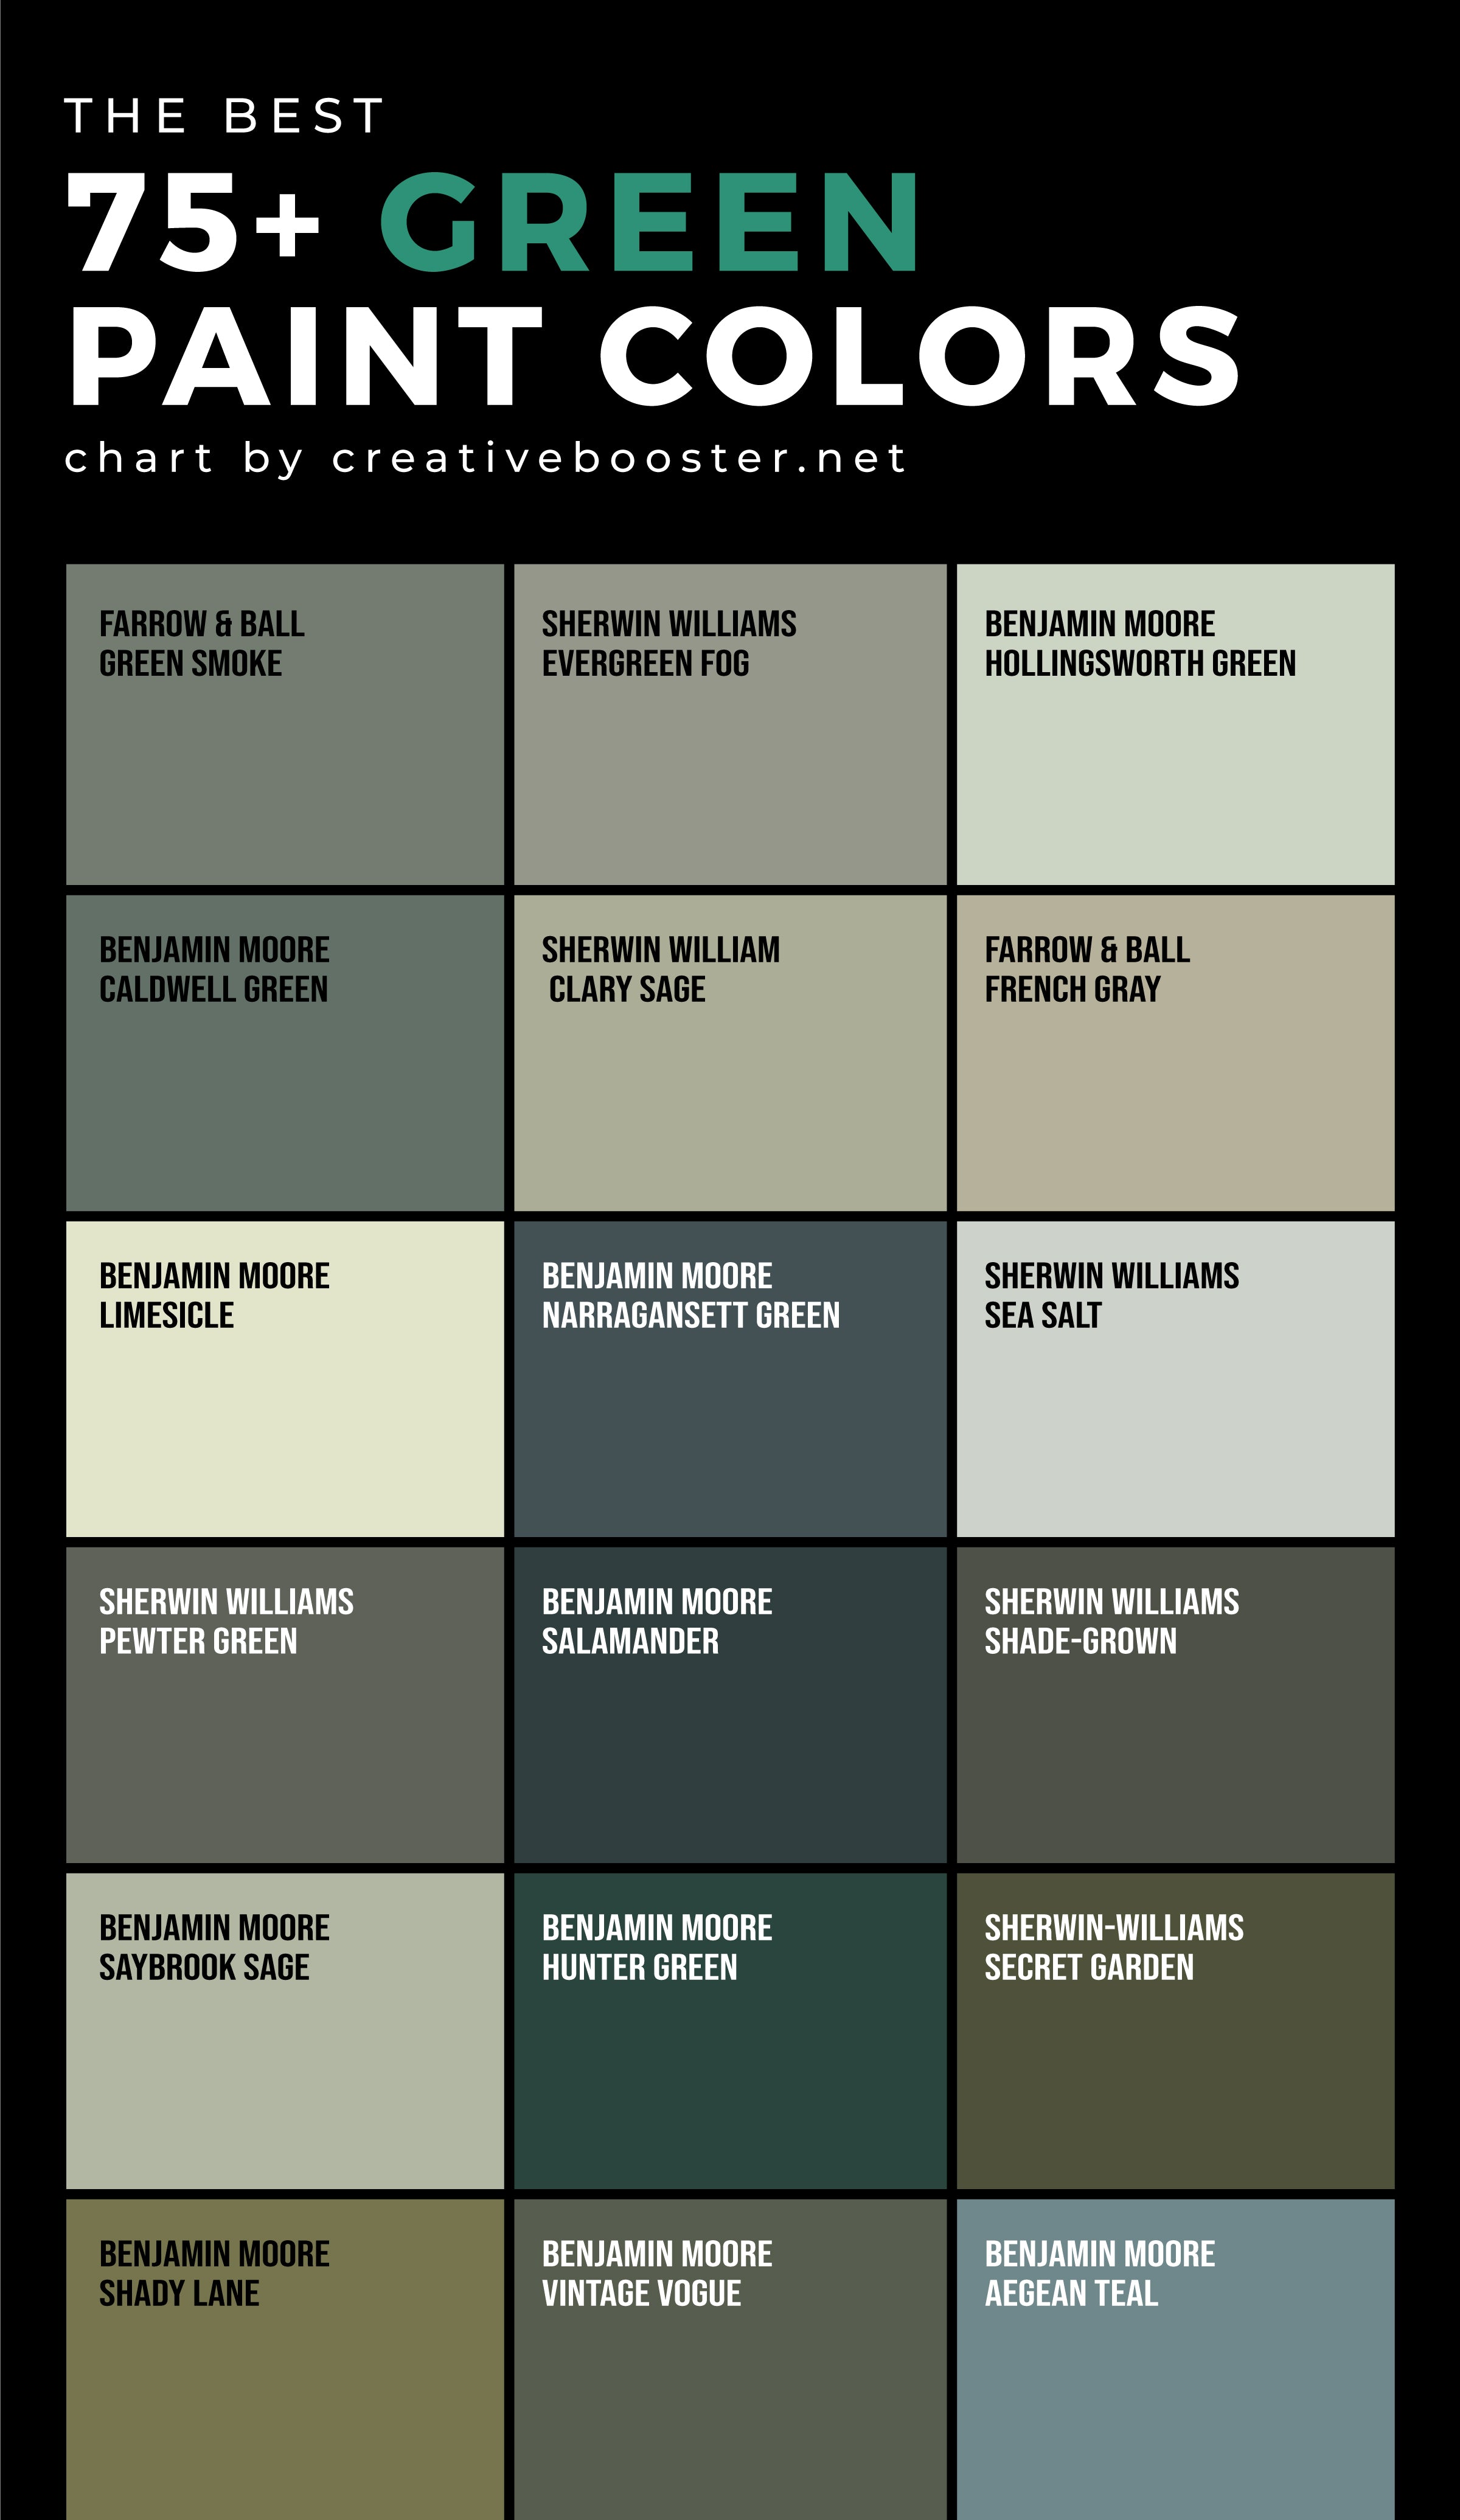 Shades-of-Green-Paint-Colors-chart-with-names-and-brands-sherwin-williams-benjamin-moore-with-dark-bg-pinterest-tall